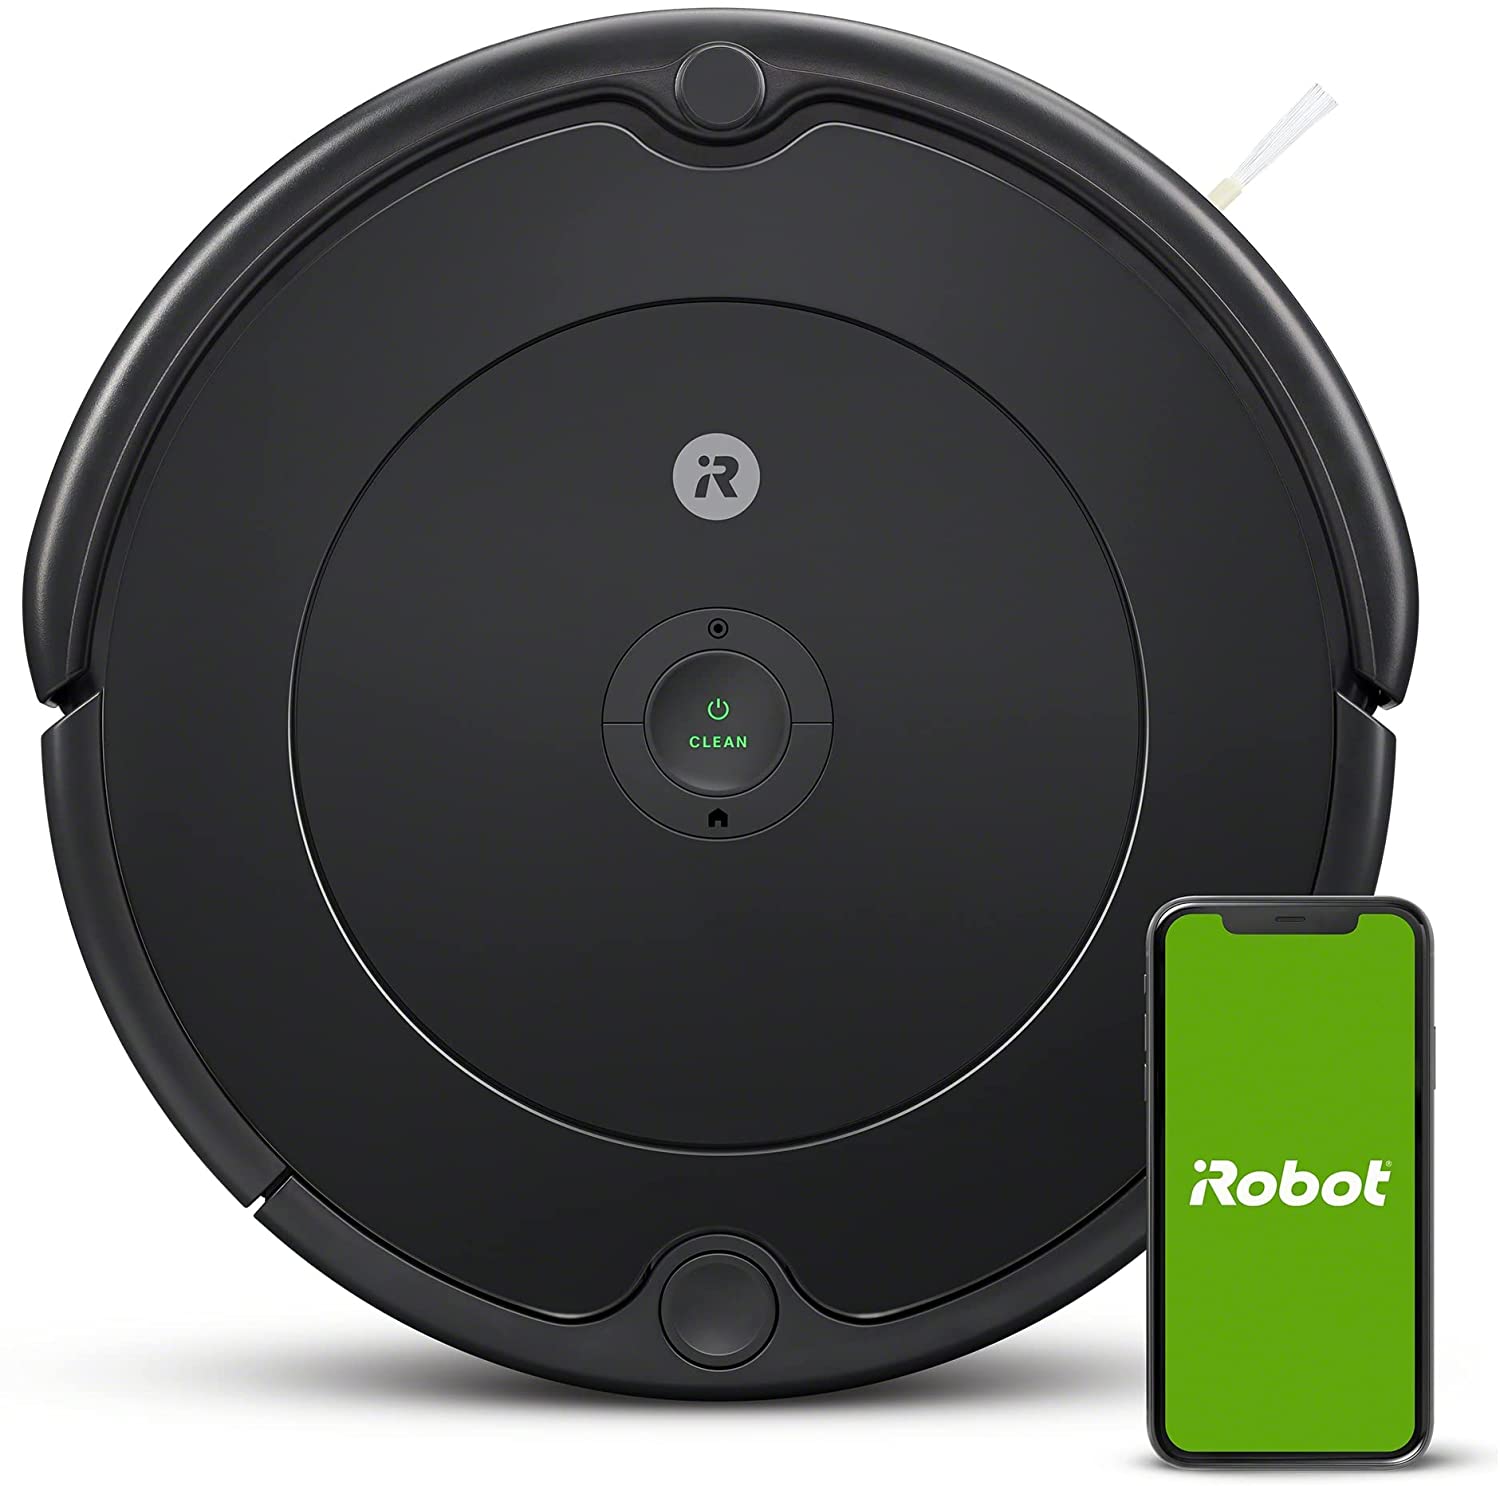 Personalized Cleaning iRobot Roomba 692 Robot Vacuum-Wi-Fi Connectivity Works with Alexa - Charcoal 